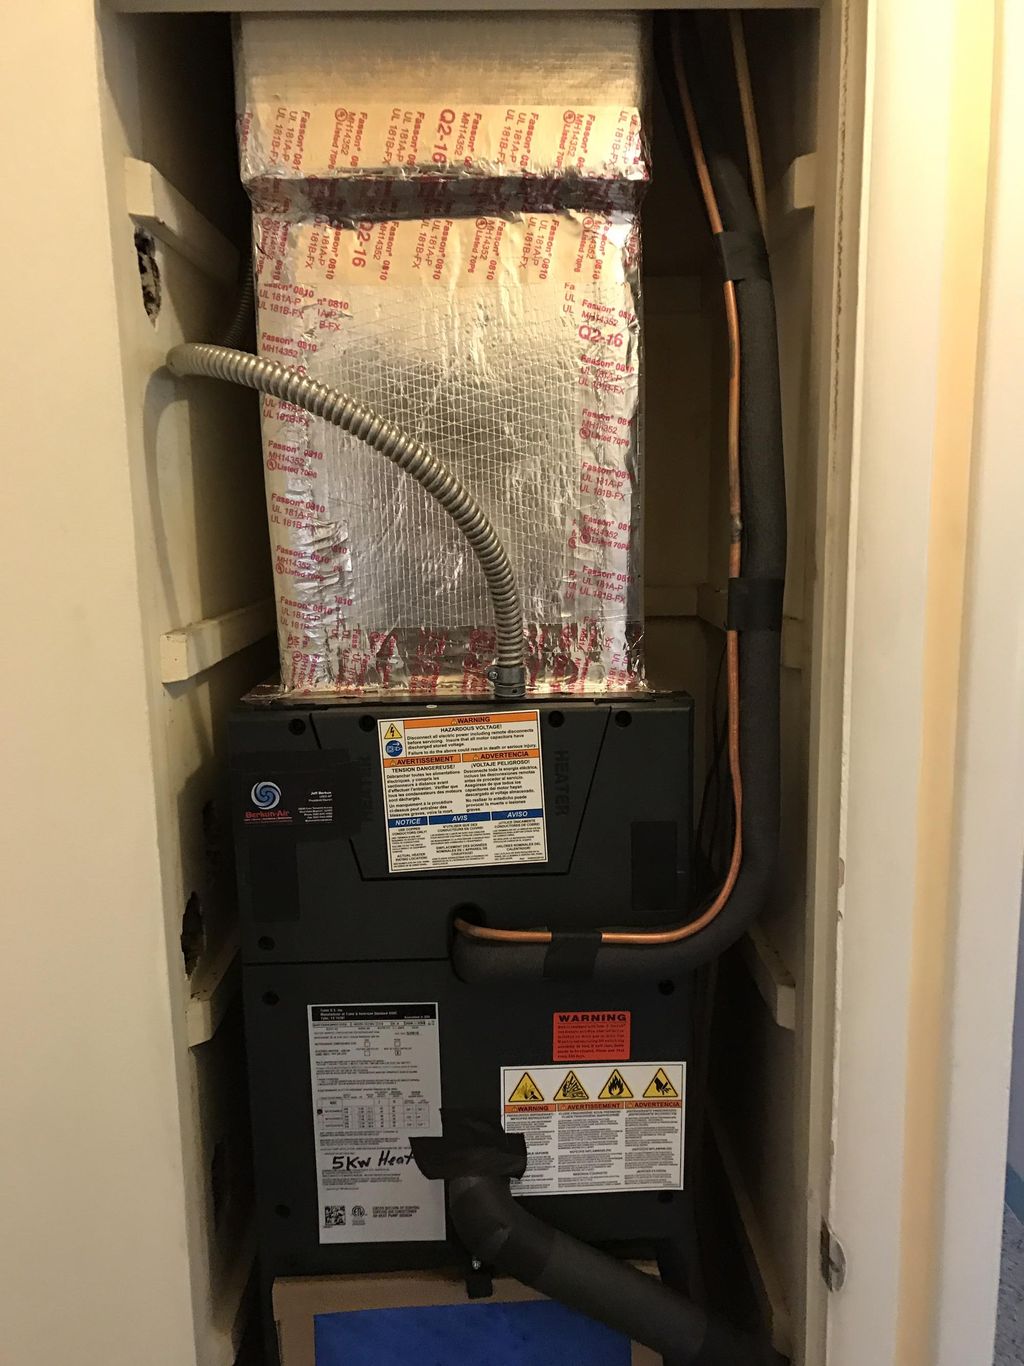 Total Heating and Cooling (Amj contracting)